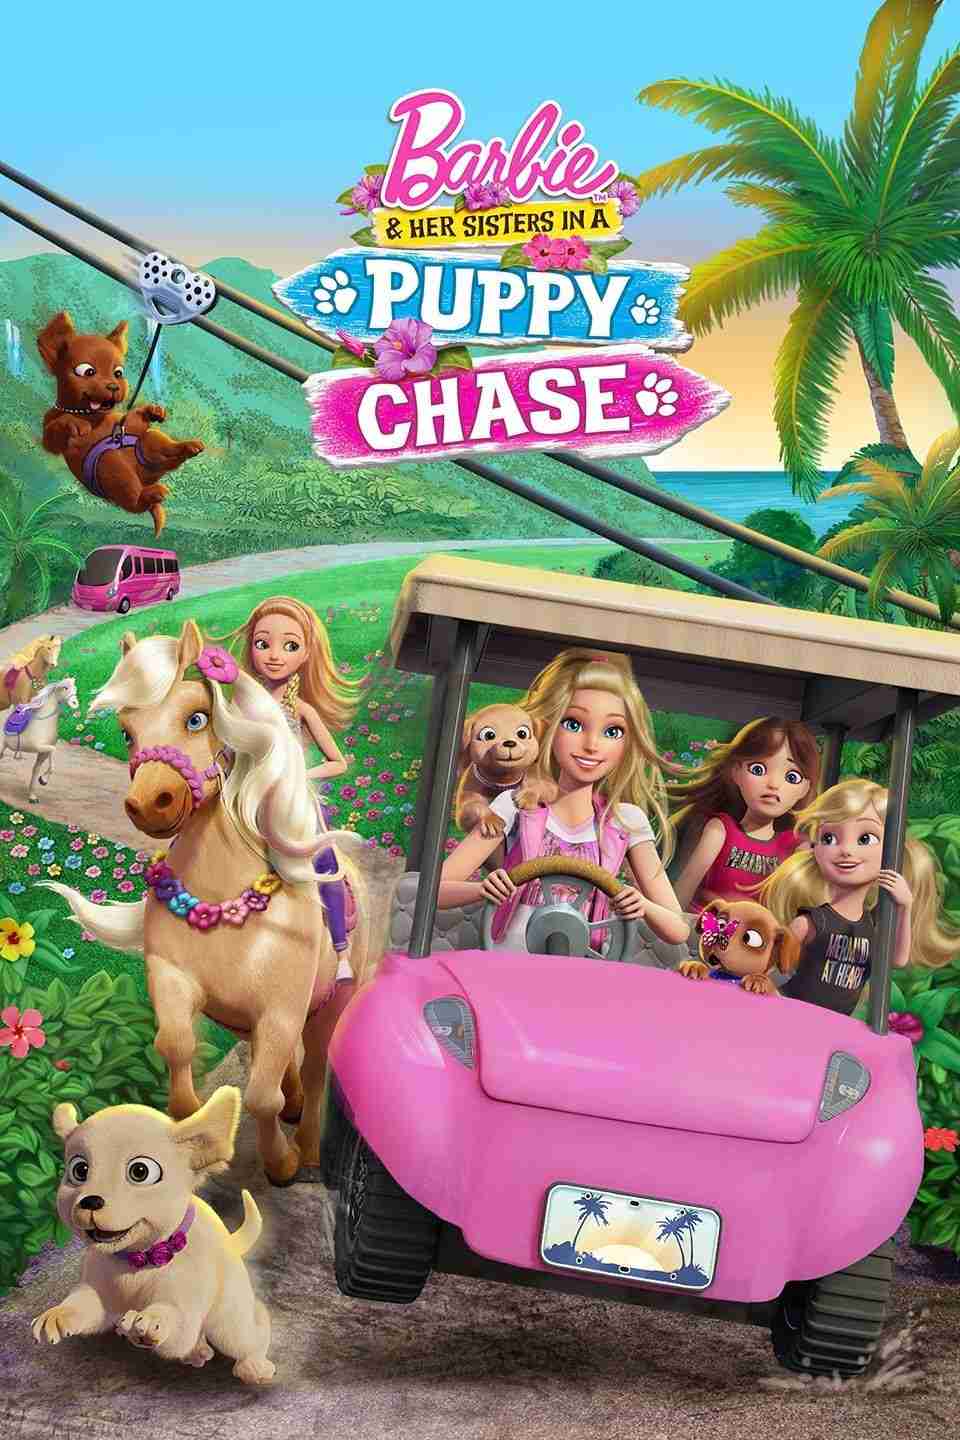 List of All Barbie Movies Online Barbie and Her Sisters in a Puppy Chase